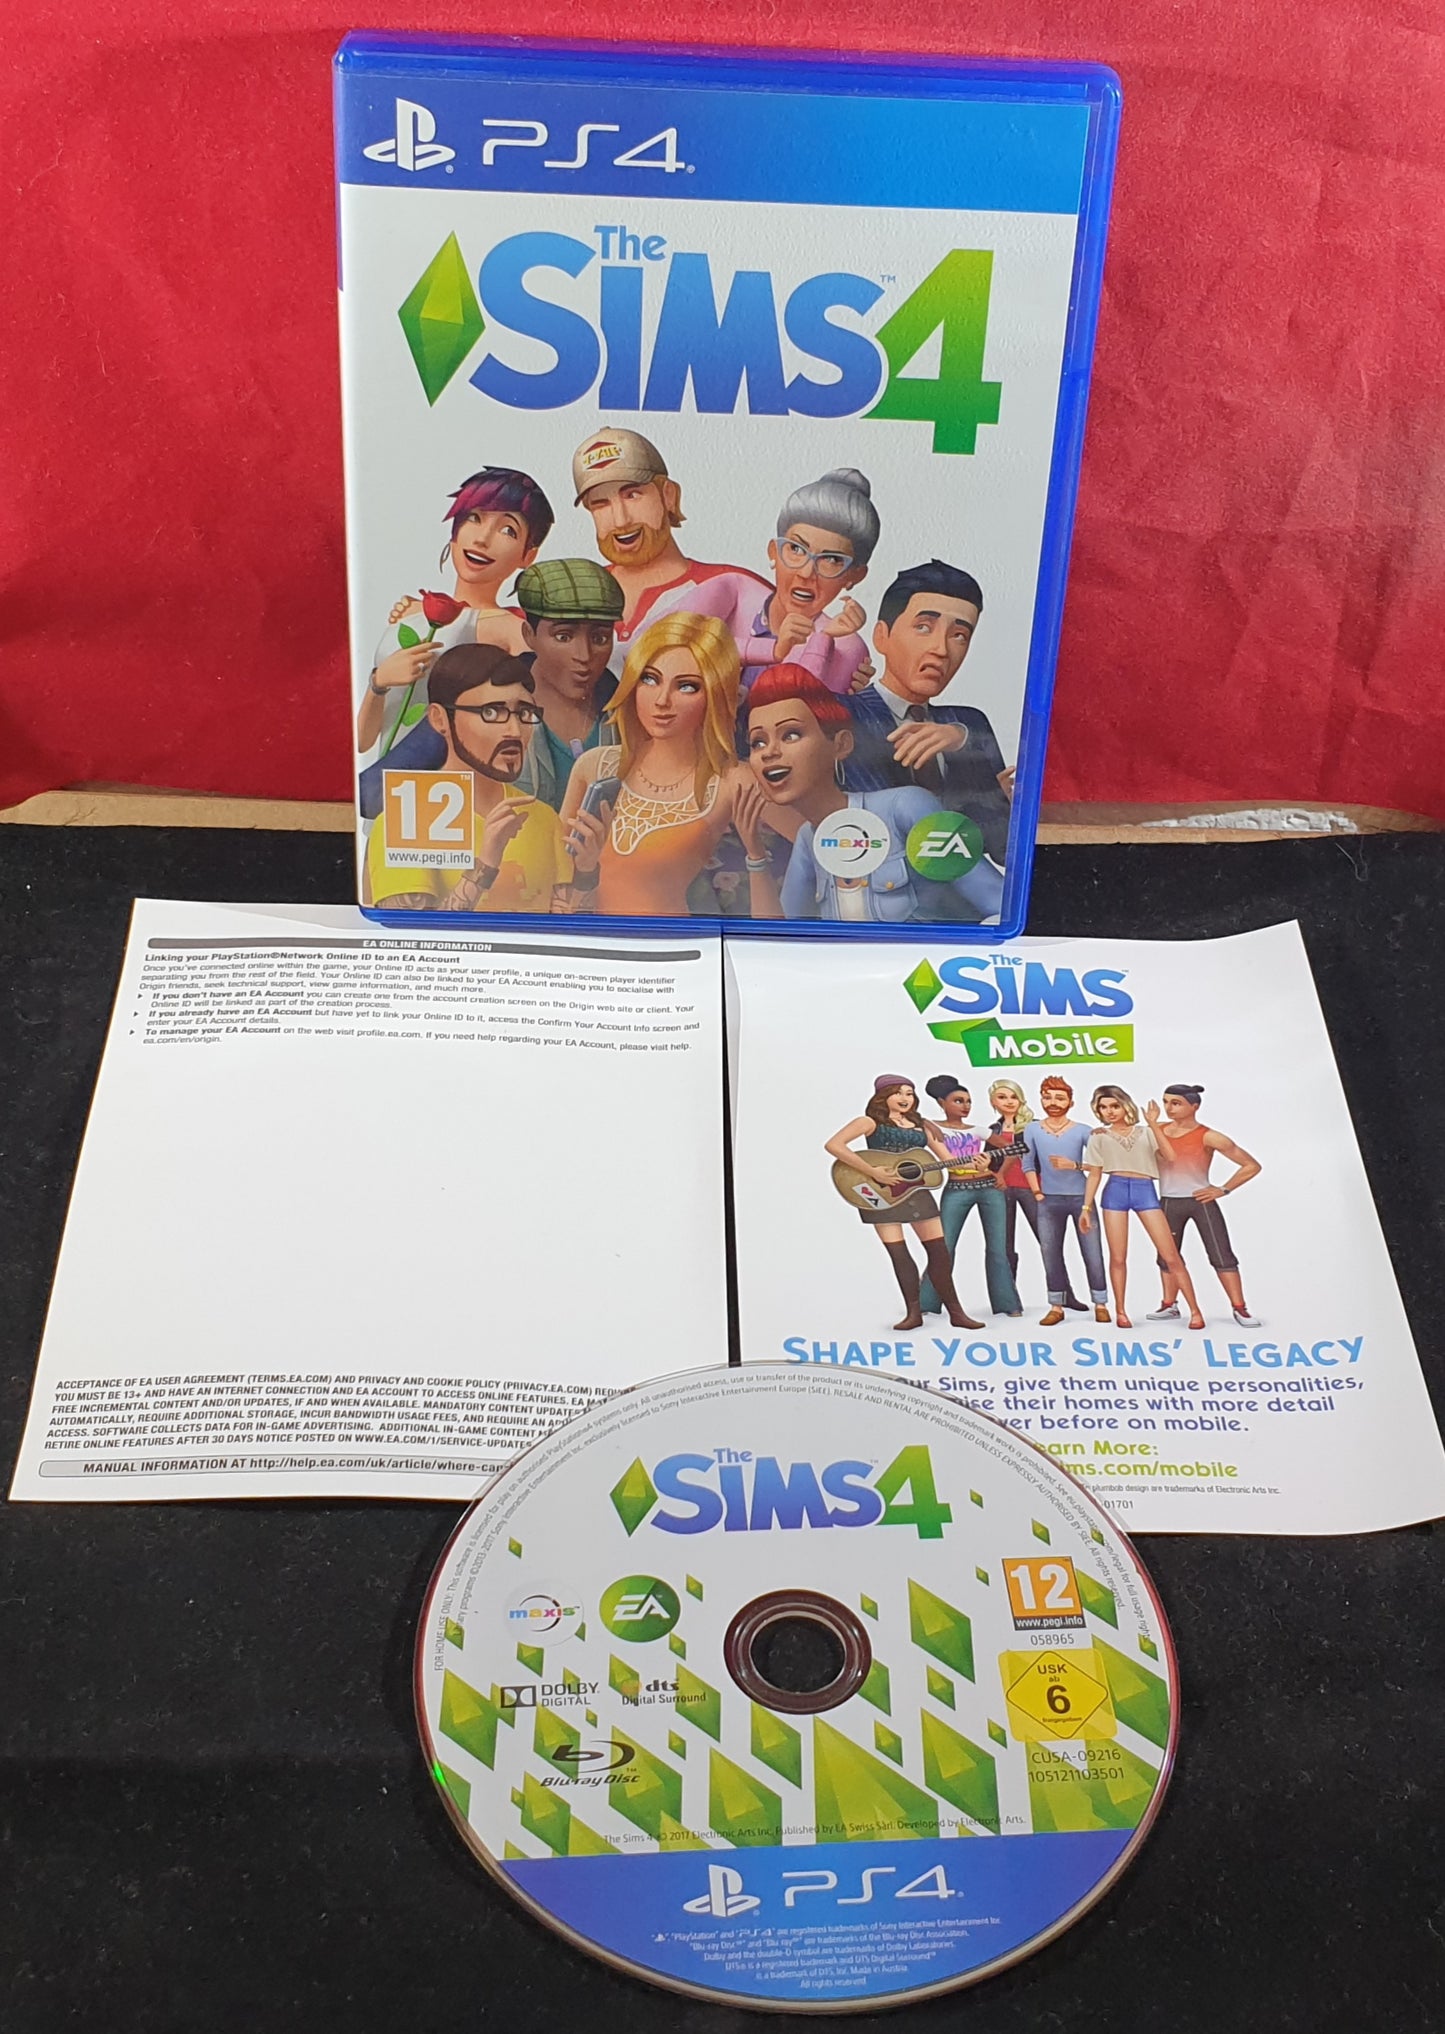 The Sims 4 Sony Playstation 4 (PS4) Game